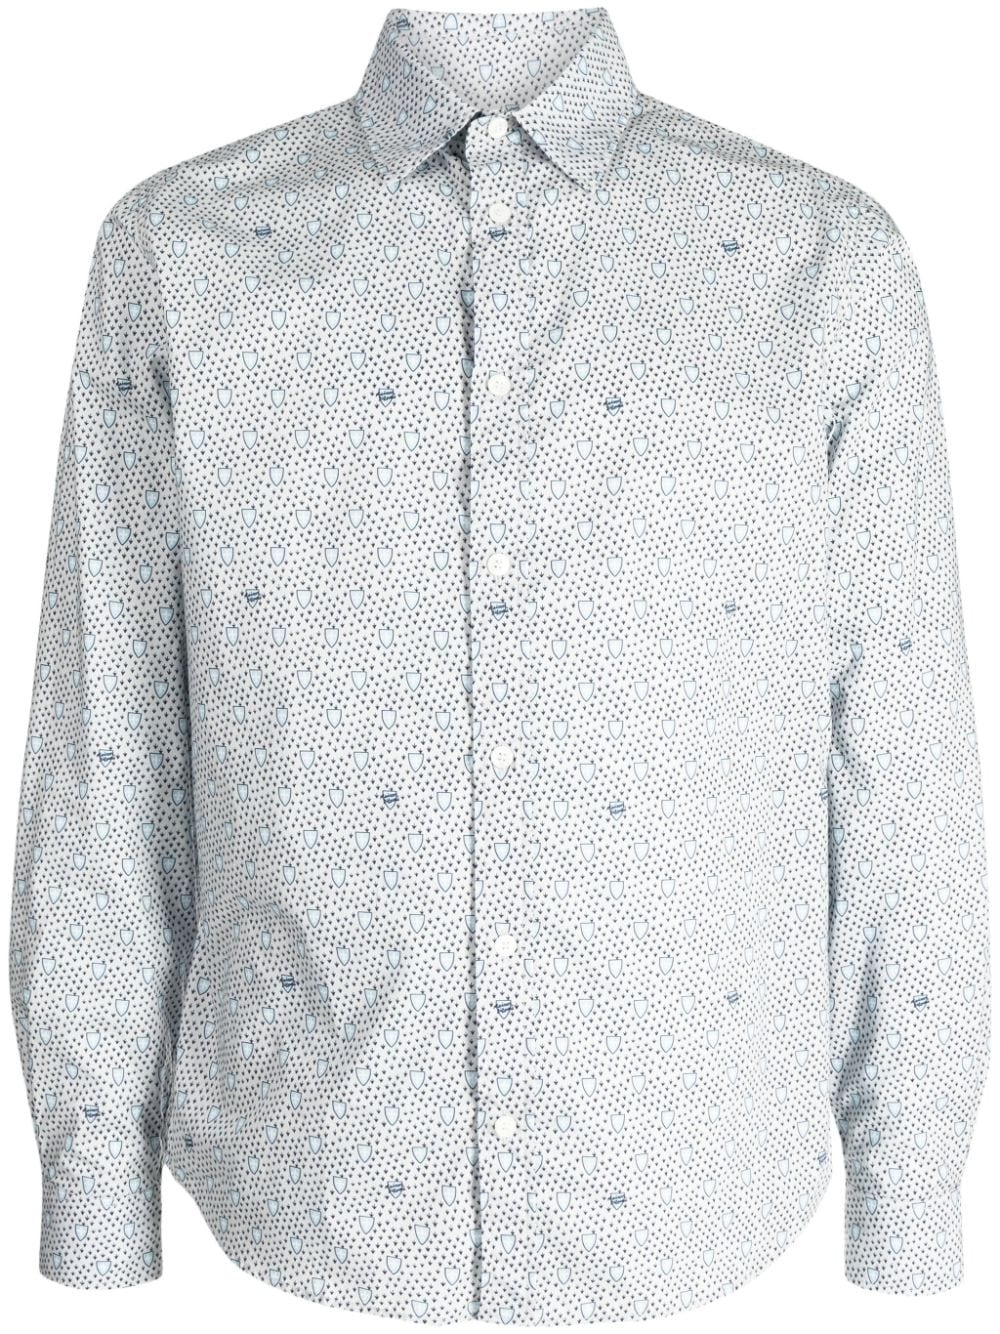 CLASSIC SHIRT IN SHIELD PRINTED COTTON - 4